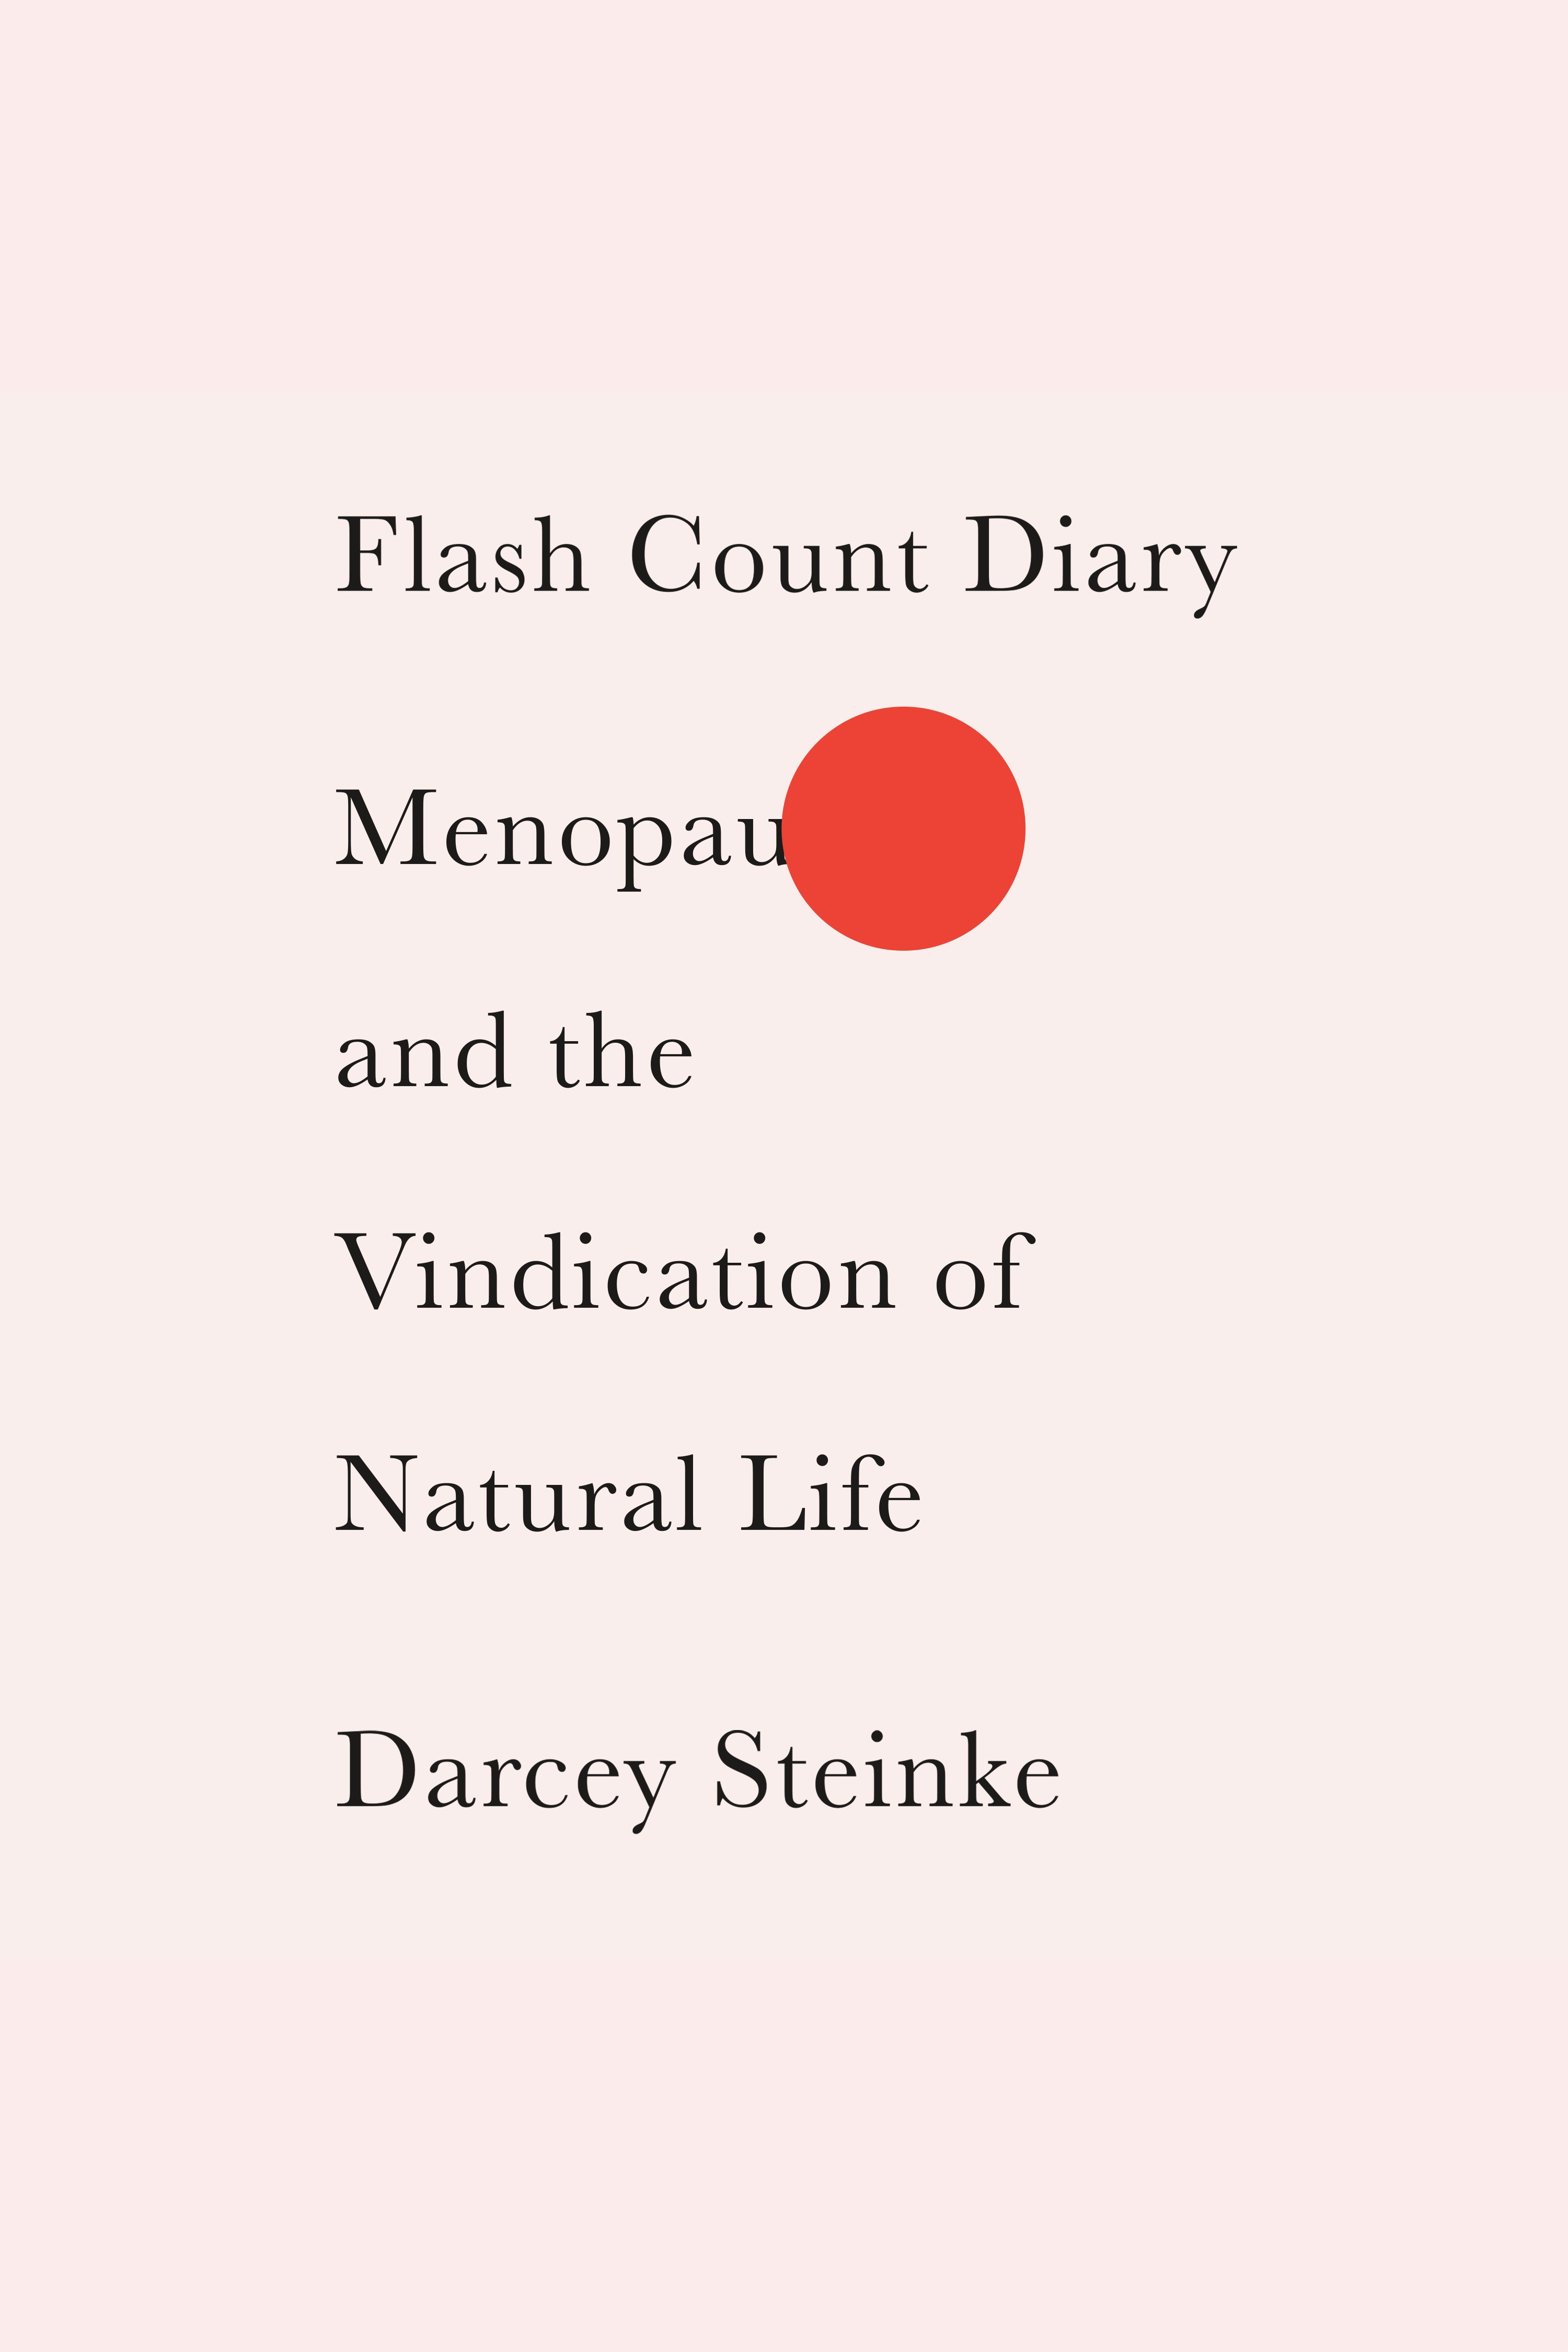 Flash Count Diary Menopause and the Vindication of Natural Life cover image